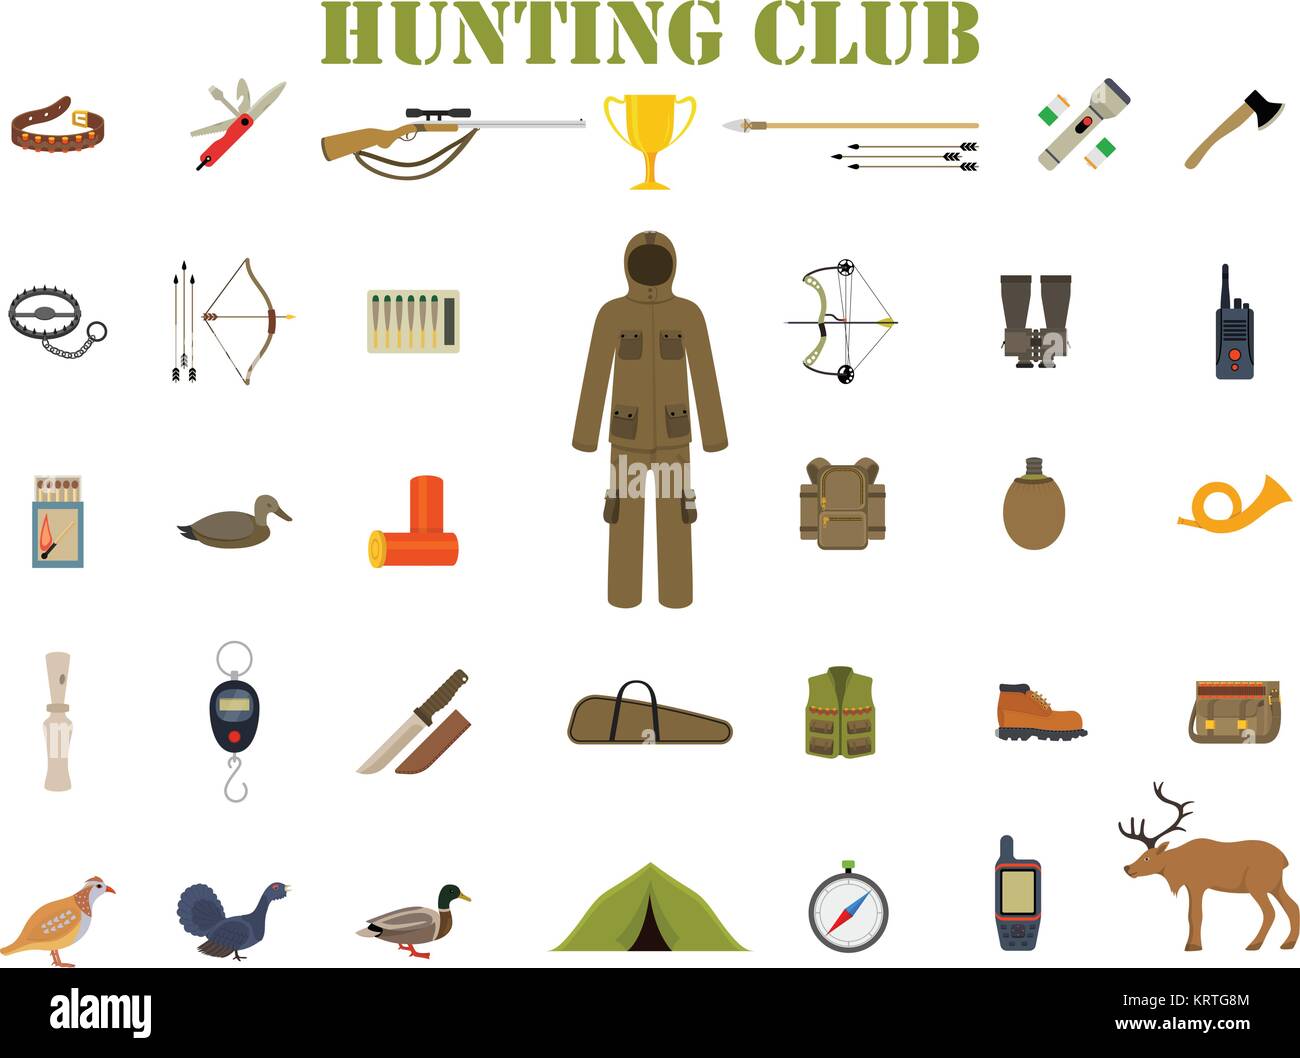 Hunting club - equipment kit with rifle, knife, suit, shotgun, boots, decoy, patronage and matches etc Vector icon set Stock Vector